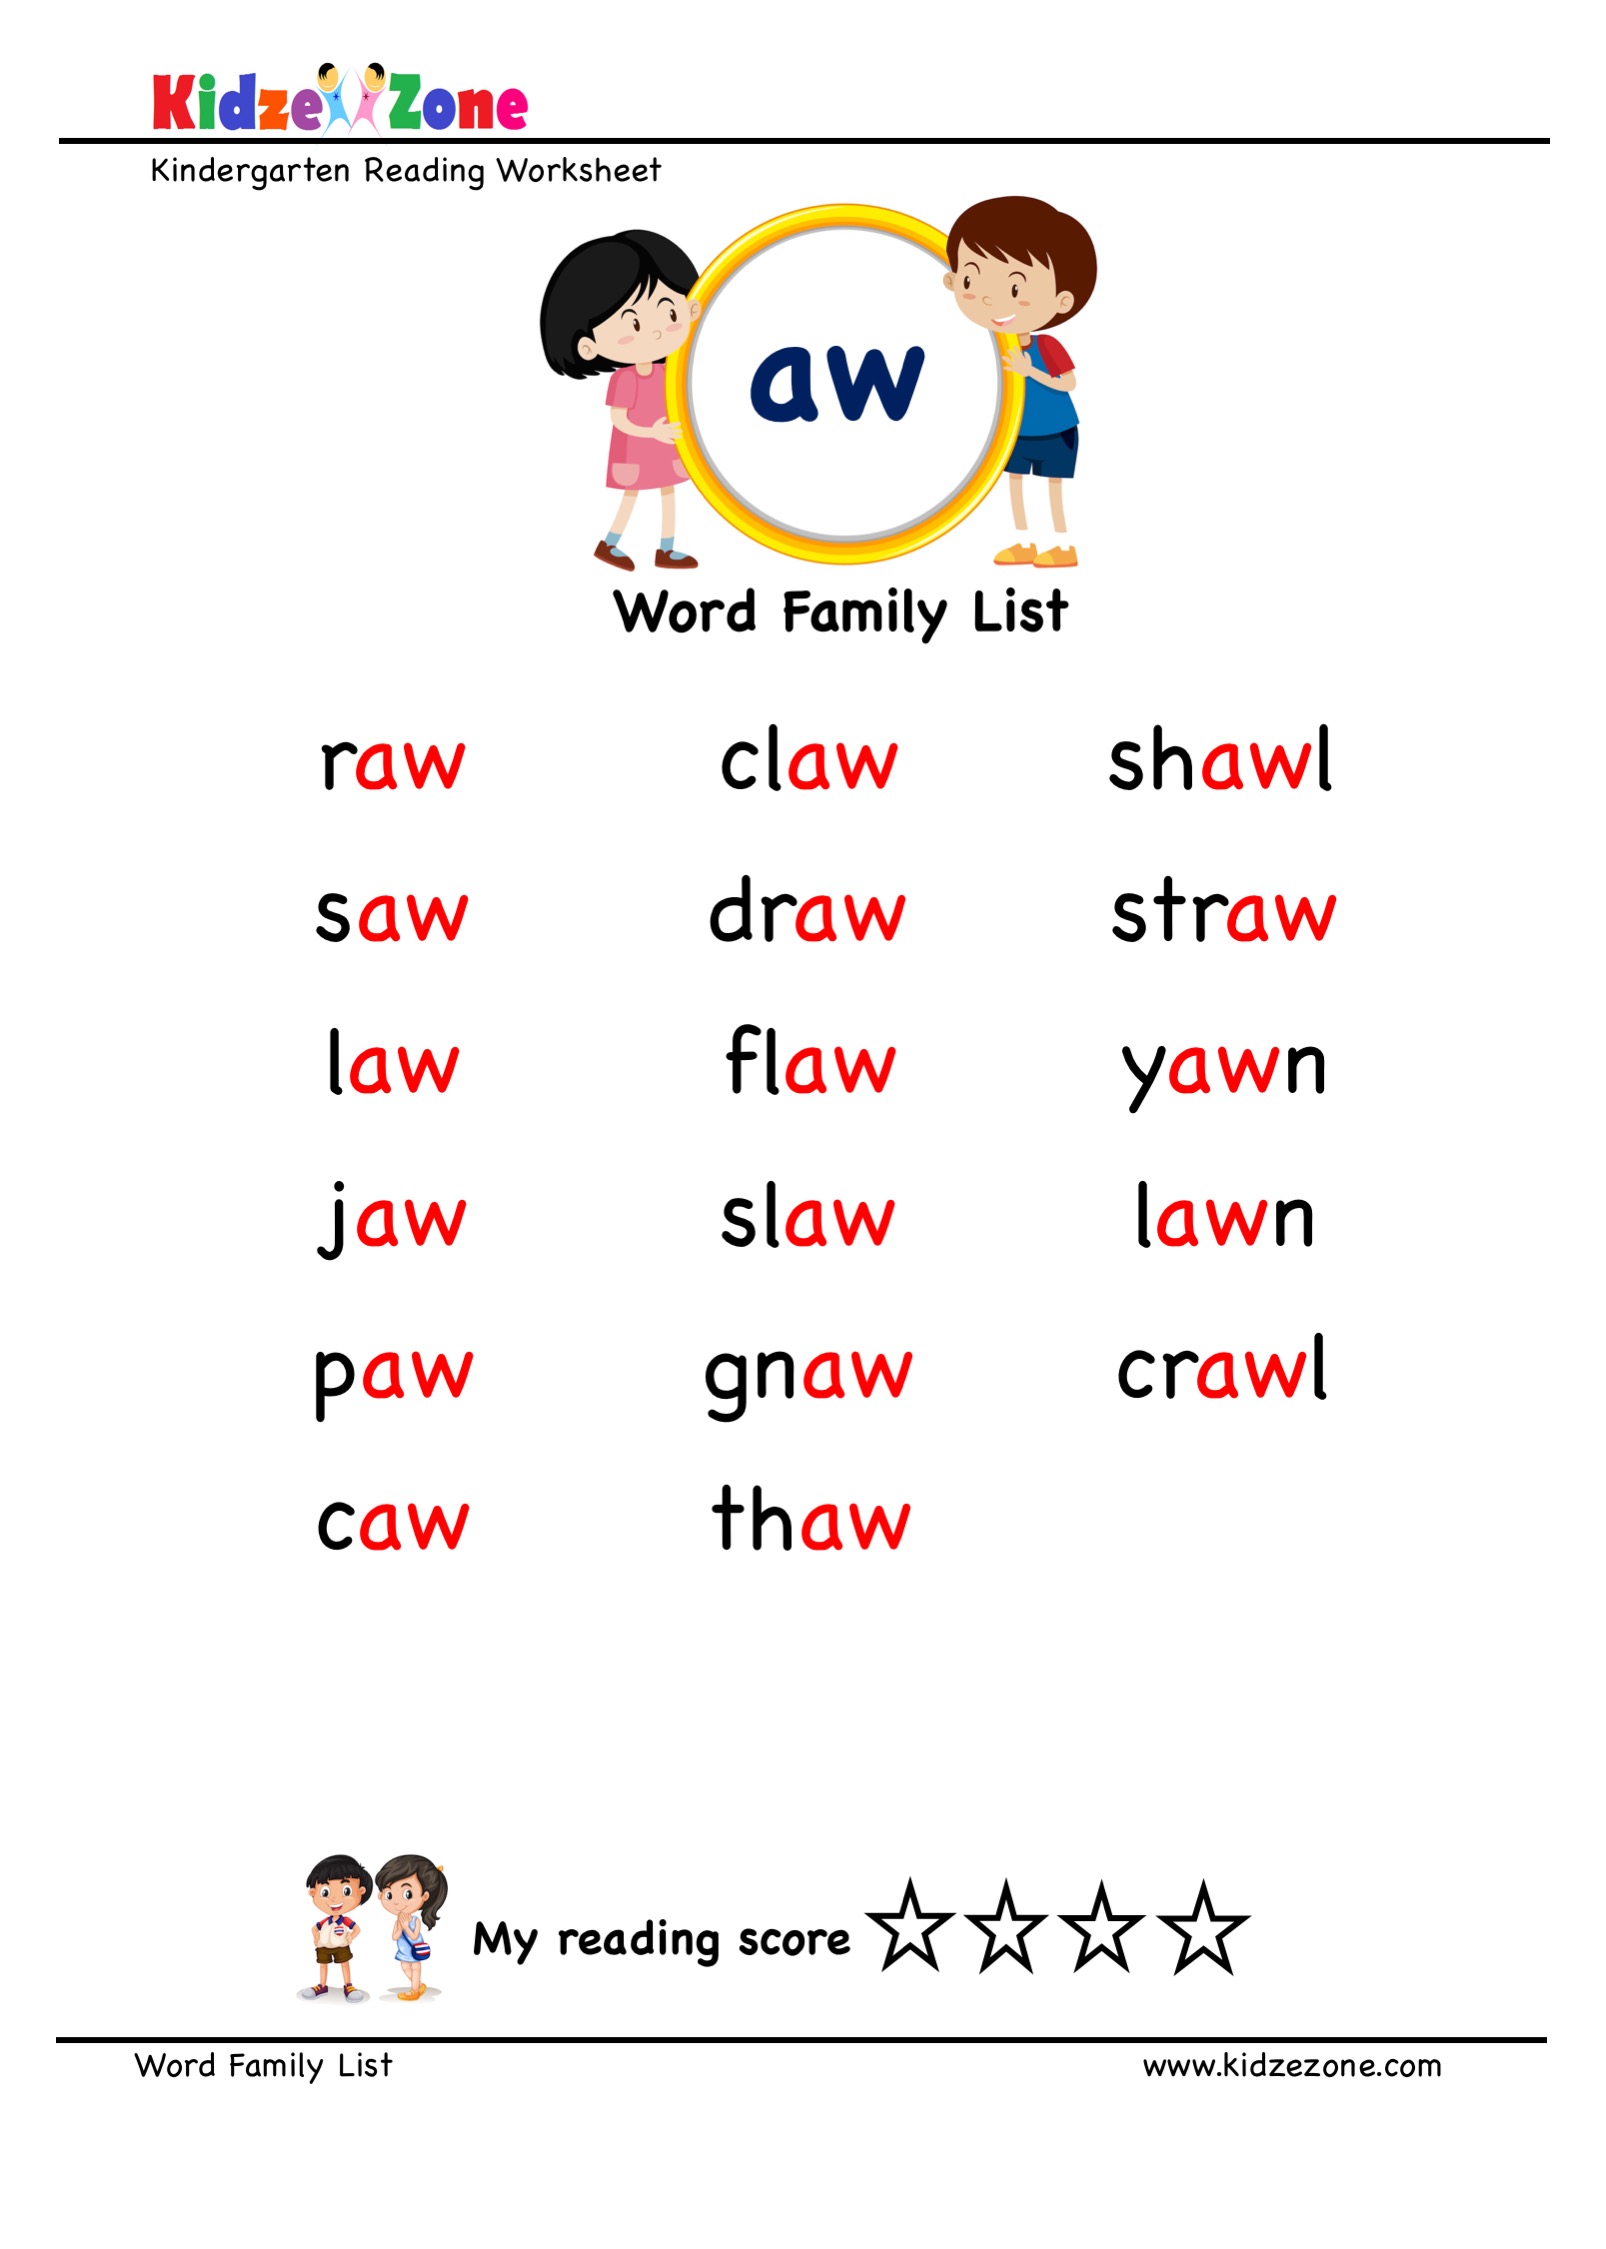 explore-and-learn-words-from-aw-word-family-with-word-list-worksheet